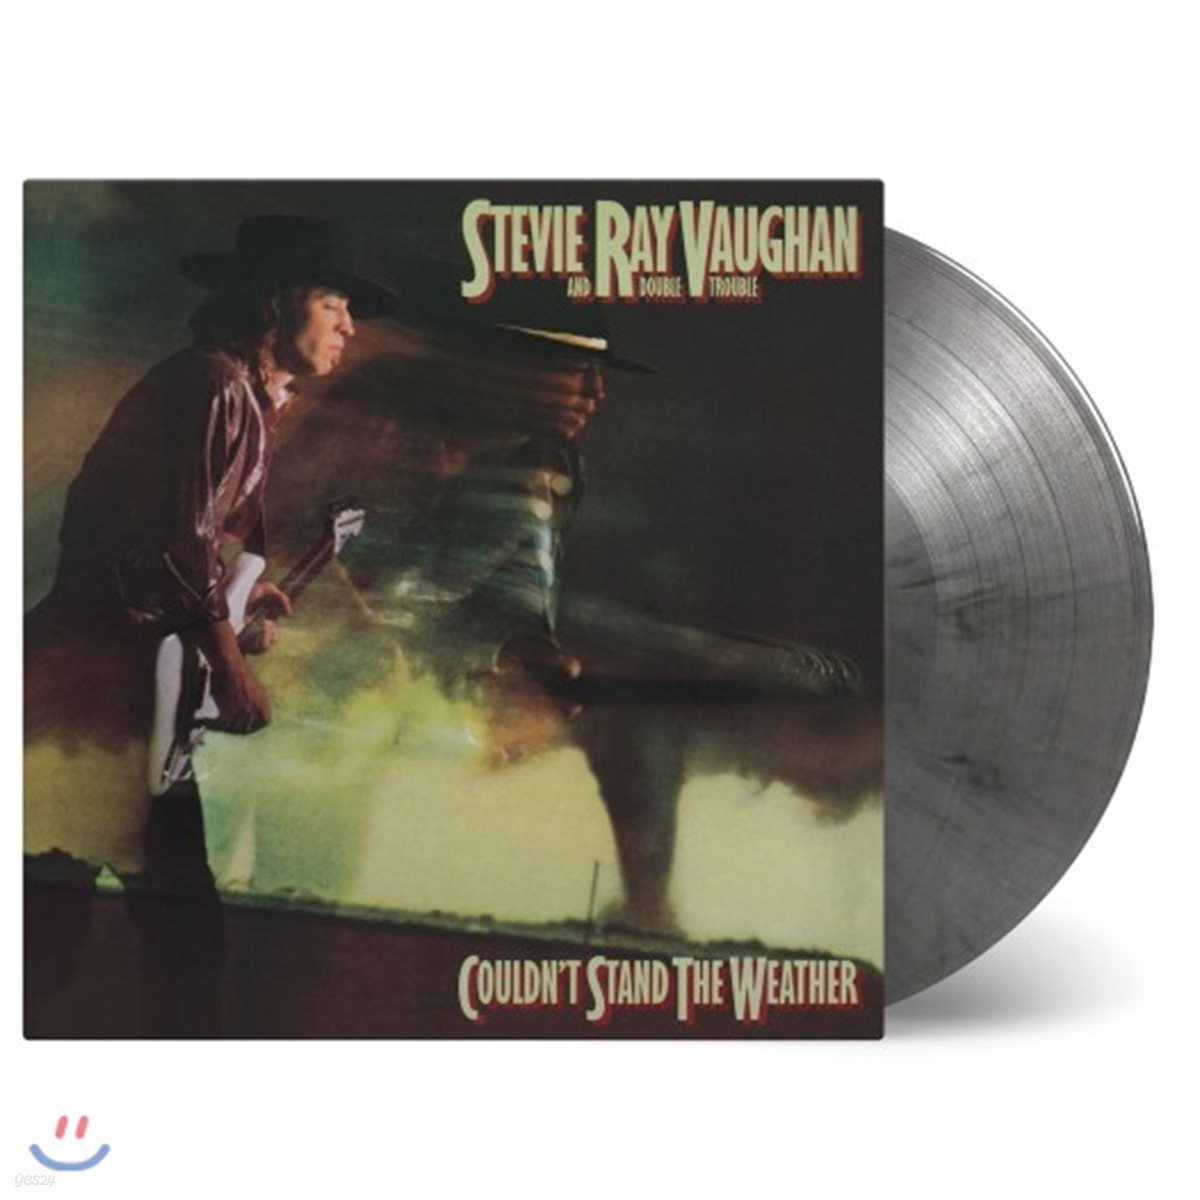 Stevie Ray Vaughan - Couldn&#39;t Stand the weather 스티브 레이본 정규 2집 [그레이 &amp; 블랙 컬러 2LP]